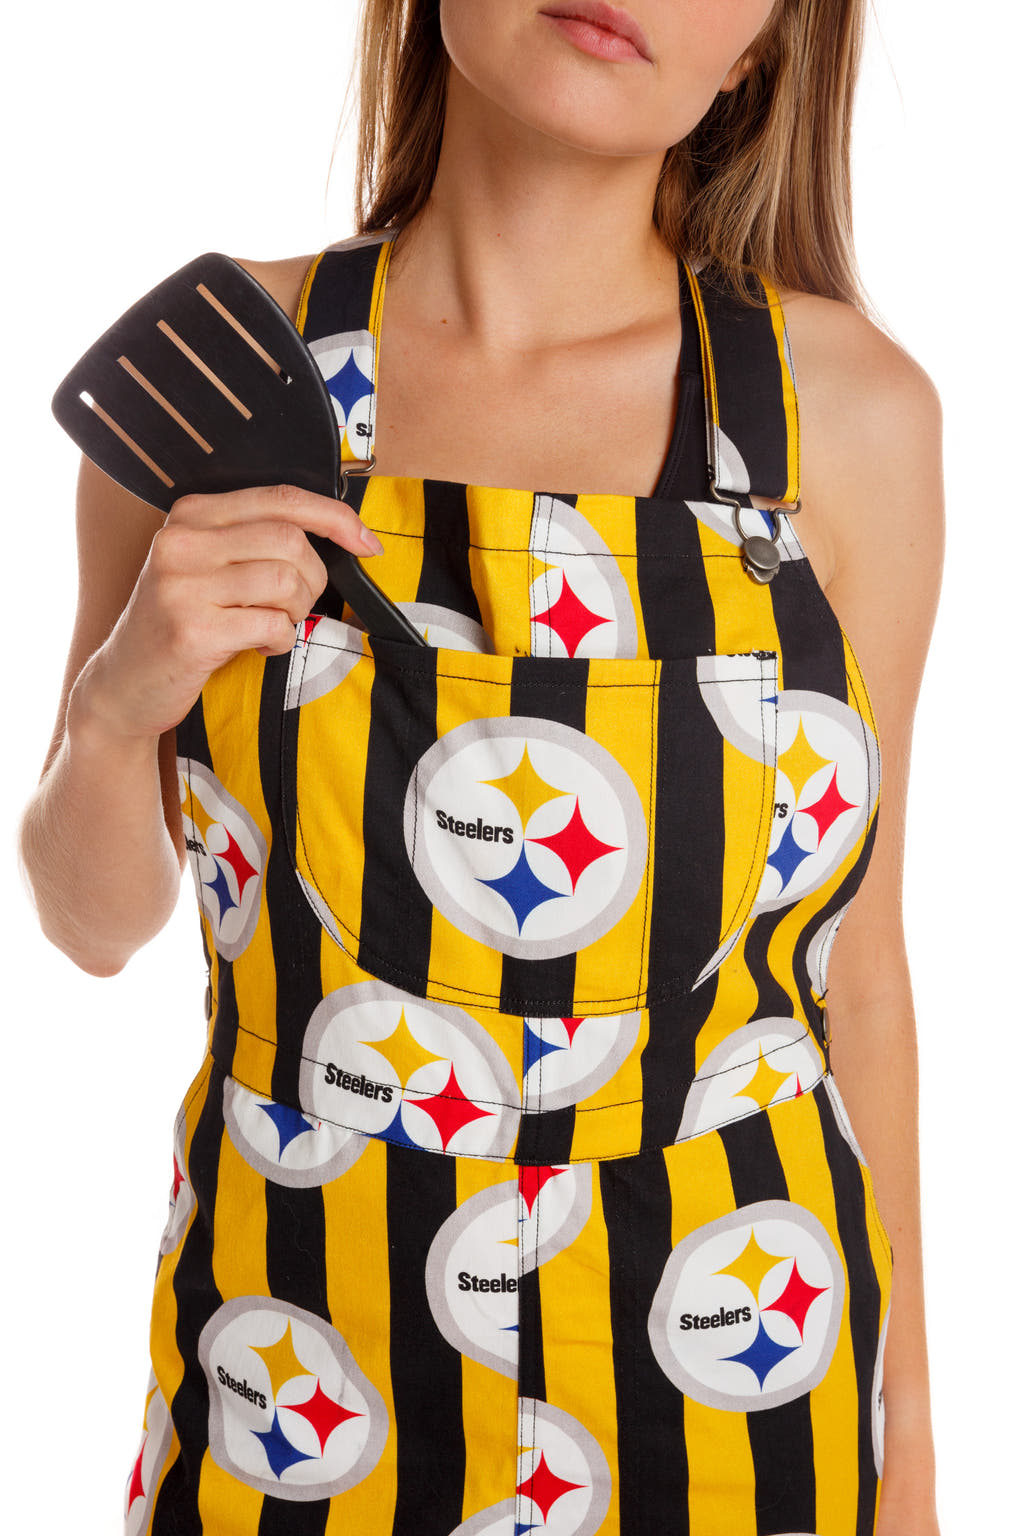 Pittsburgh Steelers Overalls for Women